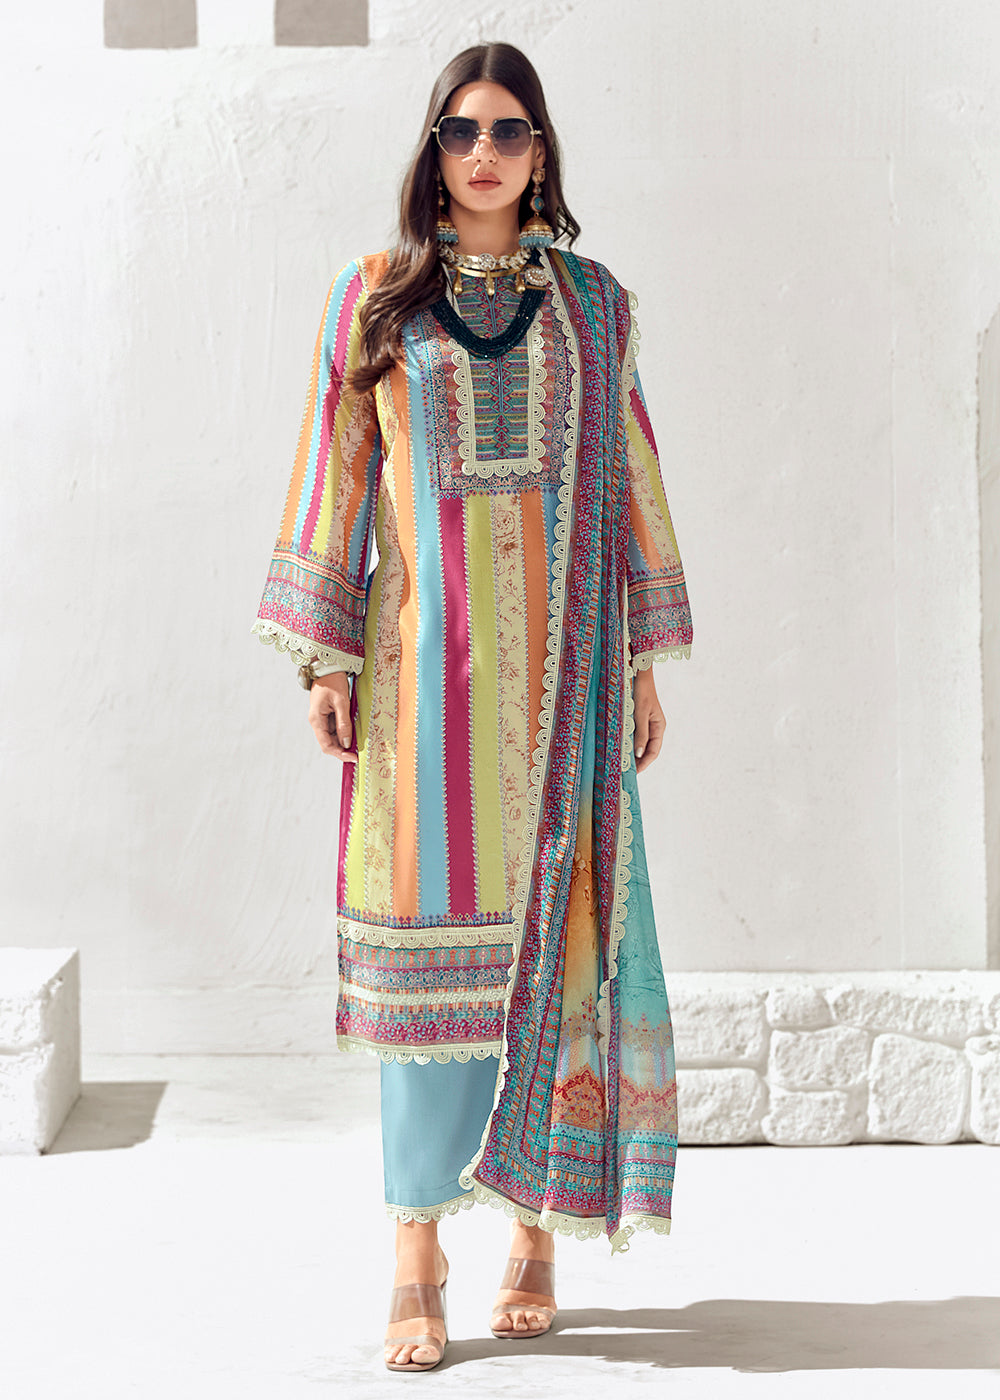 Buy Now Blue Multicolor Cotton Lawn Digital Printed Salwar Suit Online in USA, UK, Canada, Germany, Australia & Worldwide at Empress Clothing.